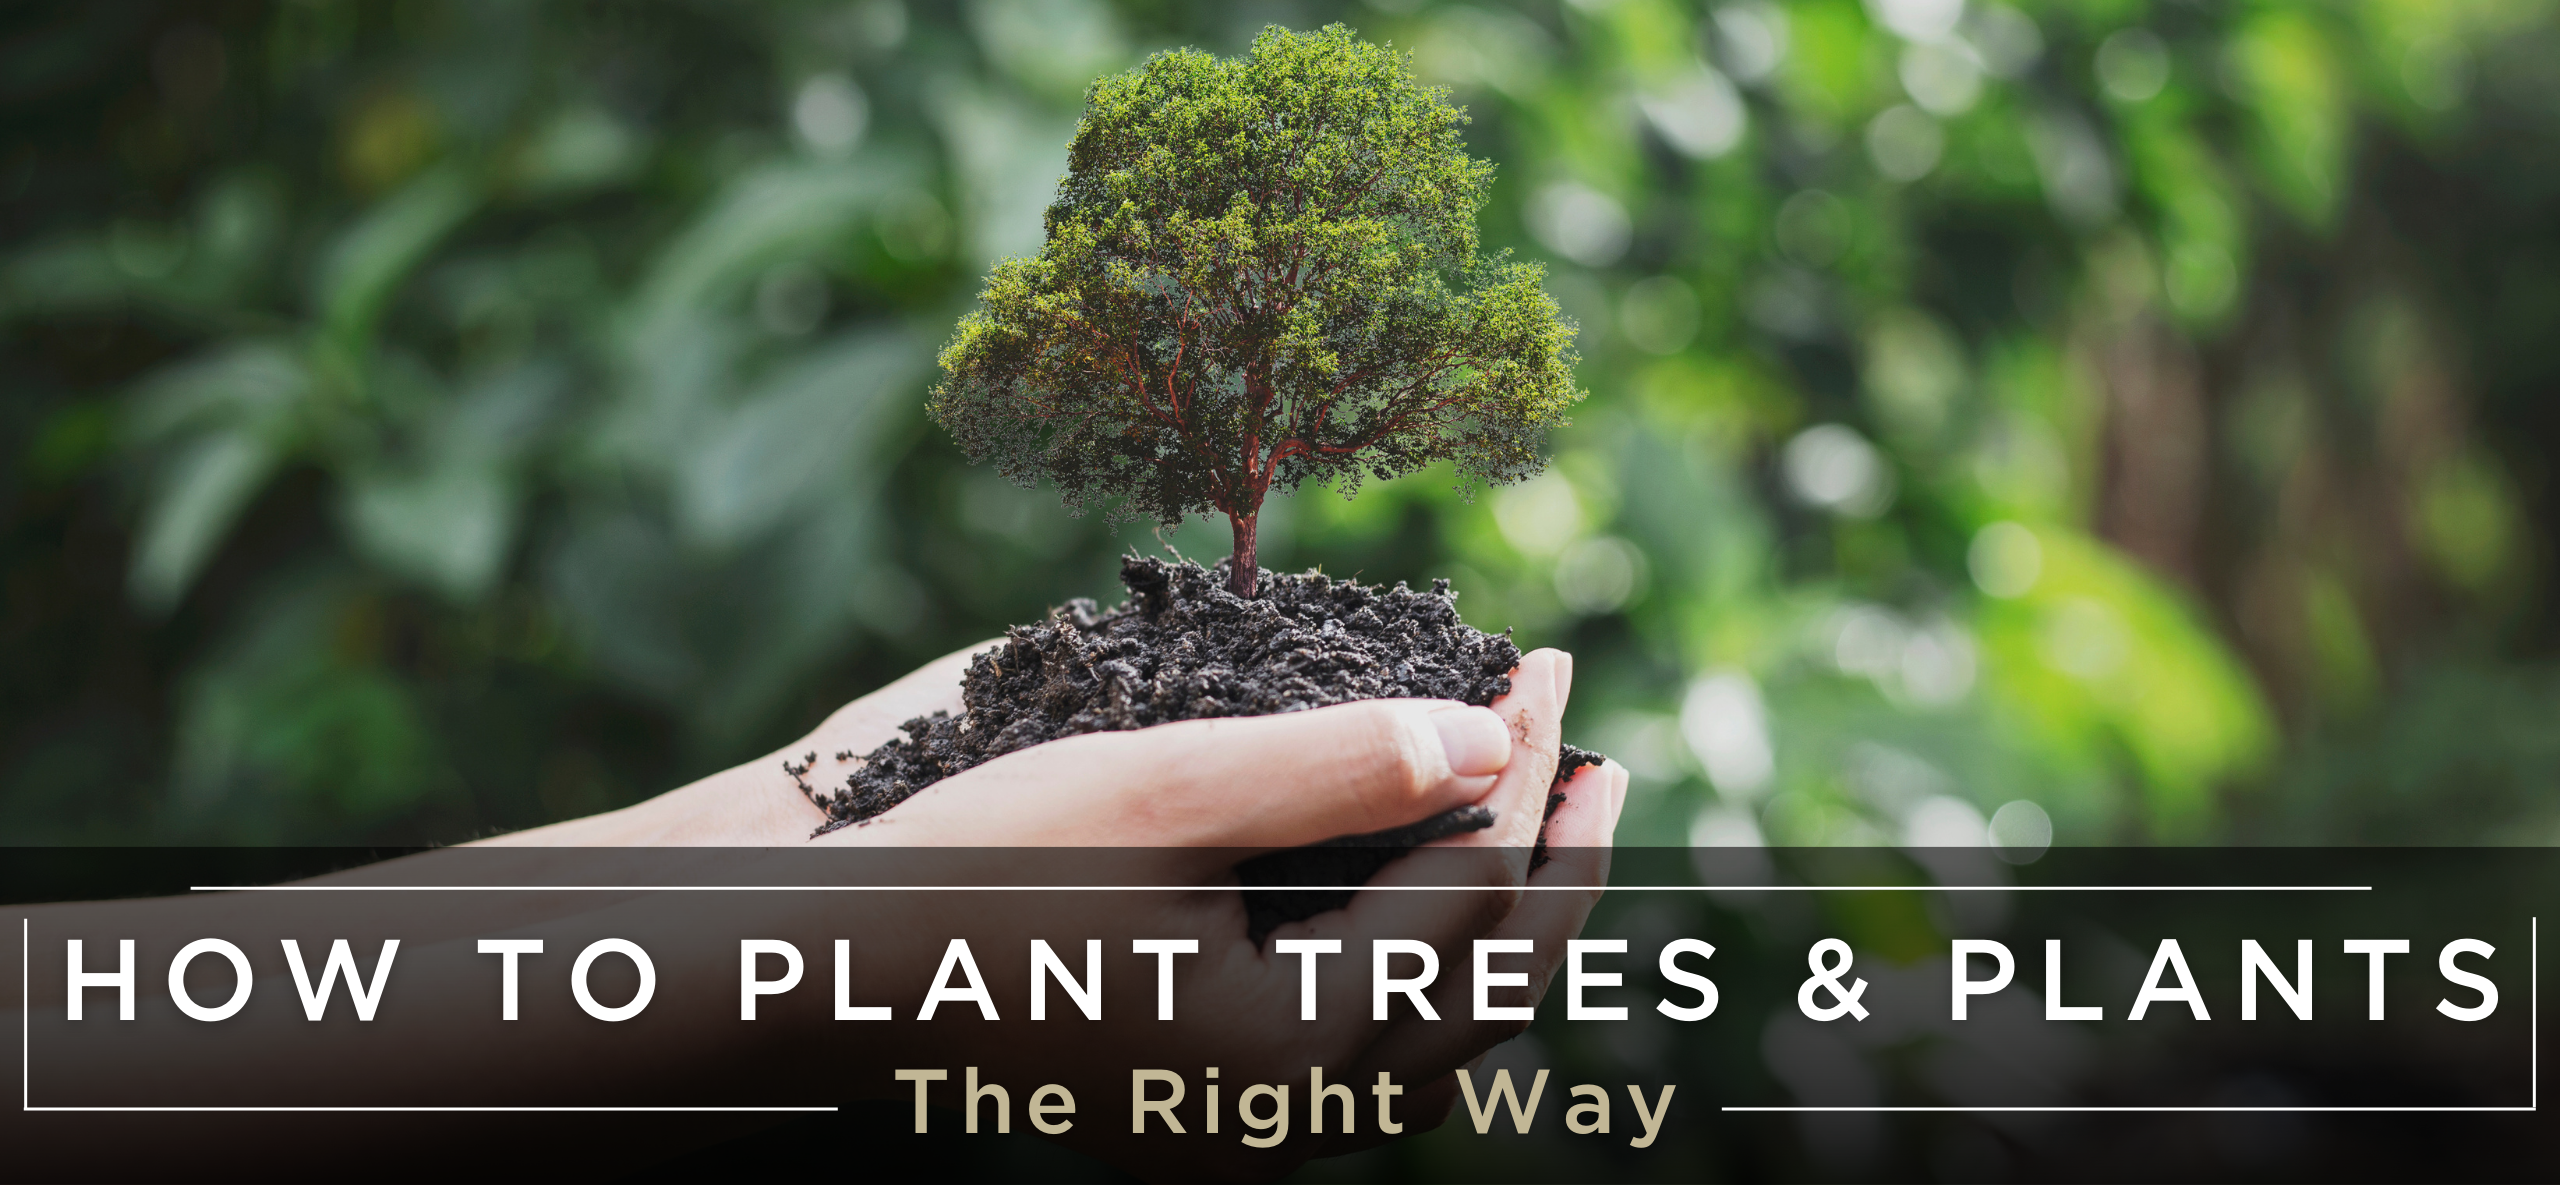 How to plant trees the right way blog header